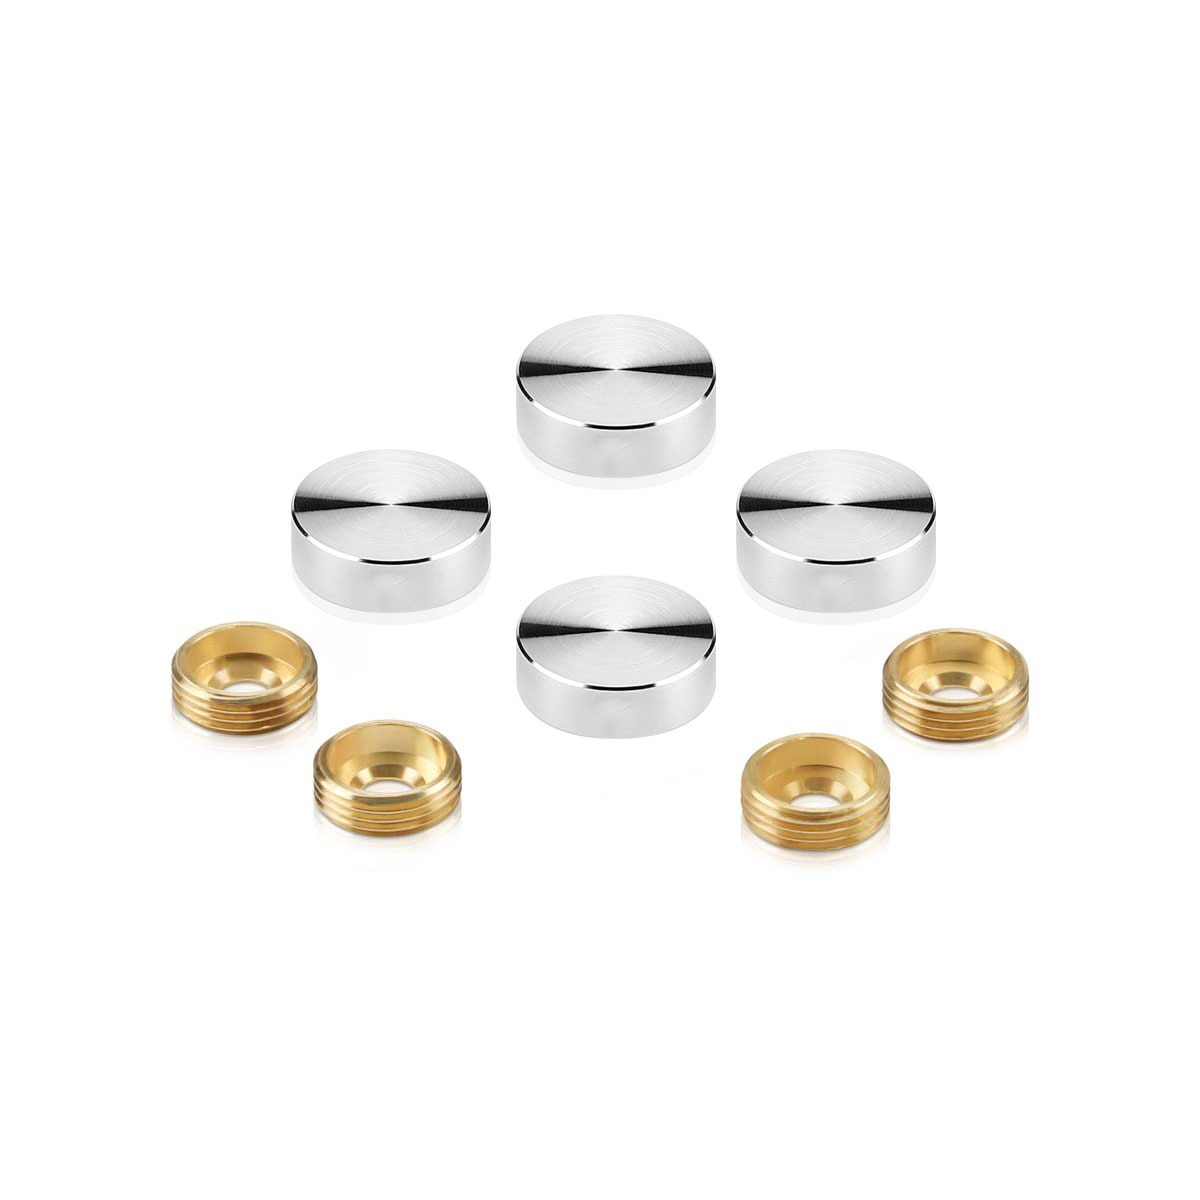 Set of 4 Screw Cover, Diameter: 3/4'', Satin Brushed Stainless Steel Finish (Indoor or Outdoor Use), Special for 3/16'' Diameter TAPCON Screw Slotted Hex (TAPCON Screw Sold Separately)